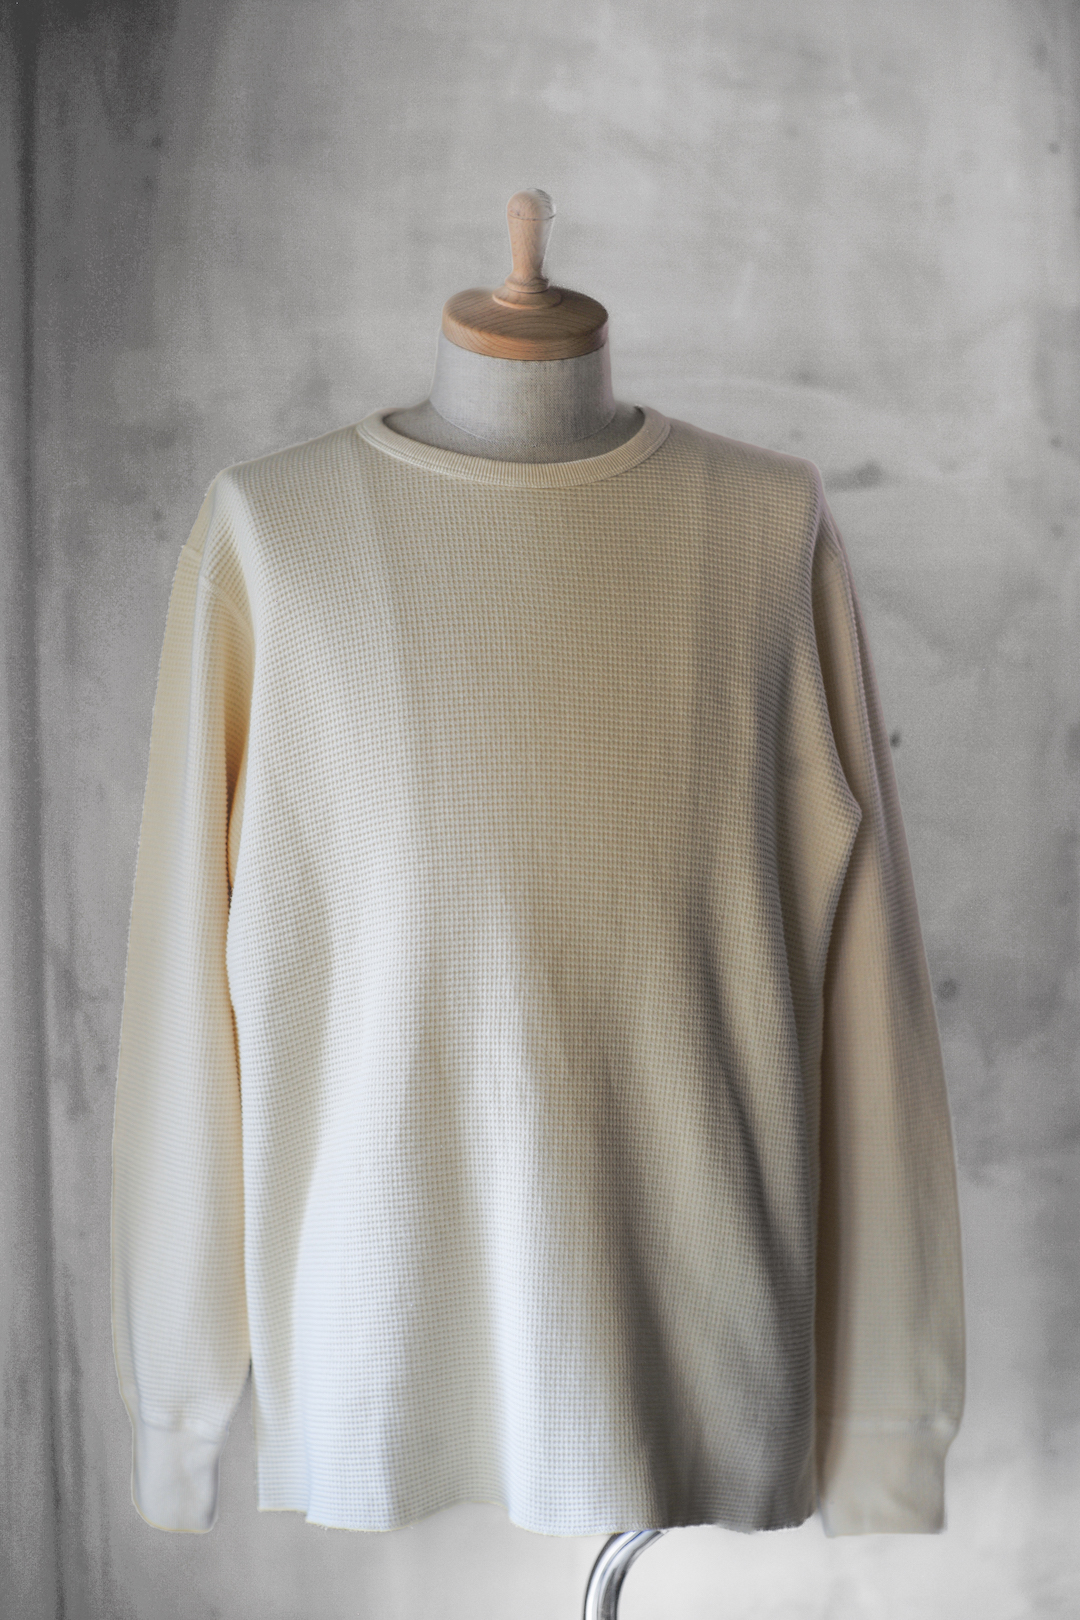 Heavy Weight Thermal Long Sleeves